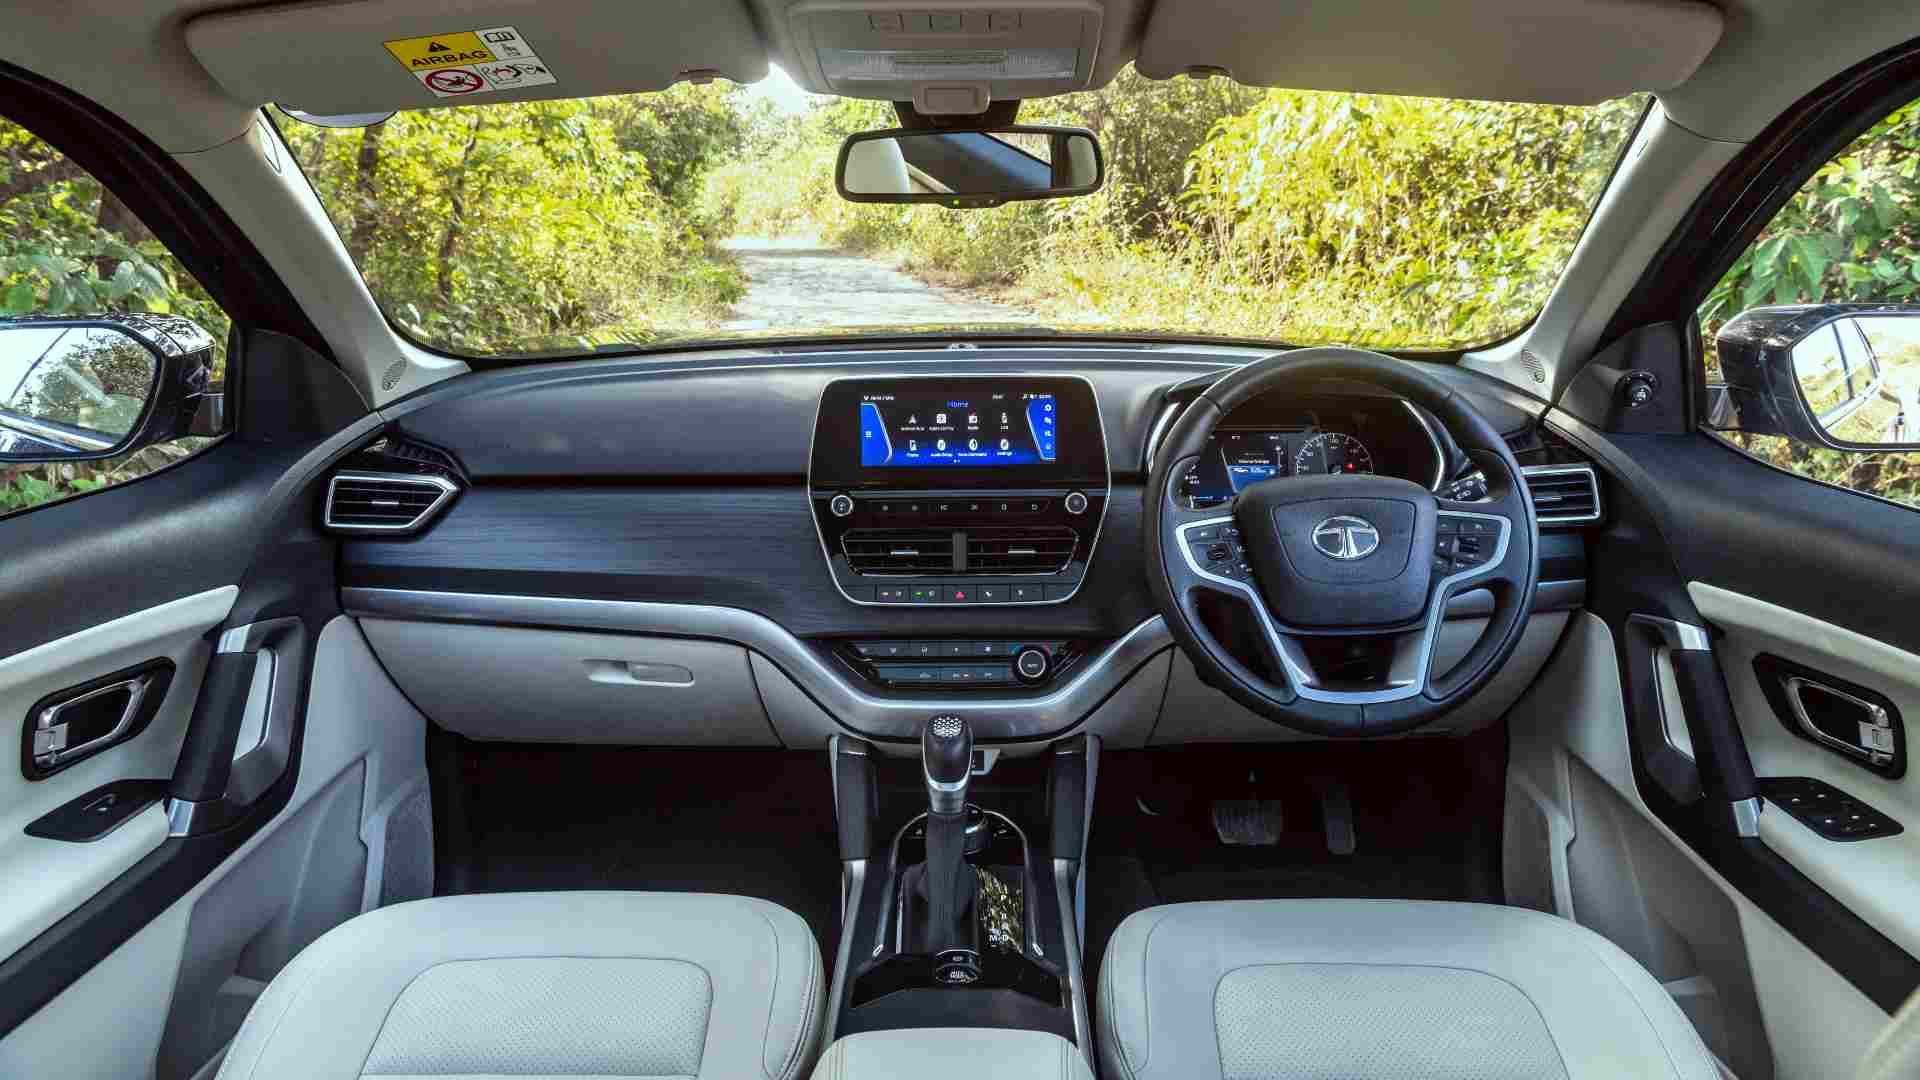 With a couple of small changes, the Tata Safari's interior feels more premium than the Harrier's. Image: Overdrive/Anis Shaikh